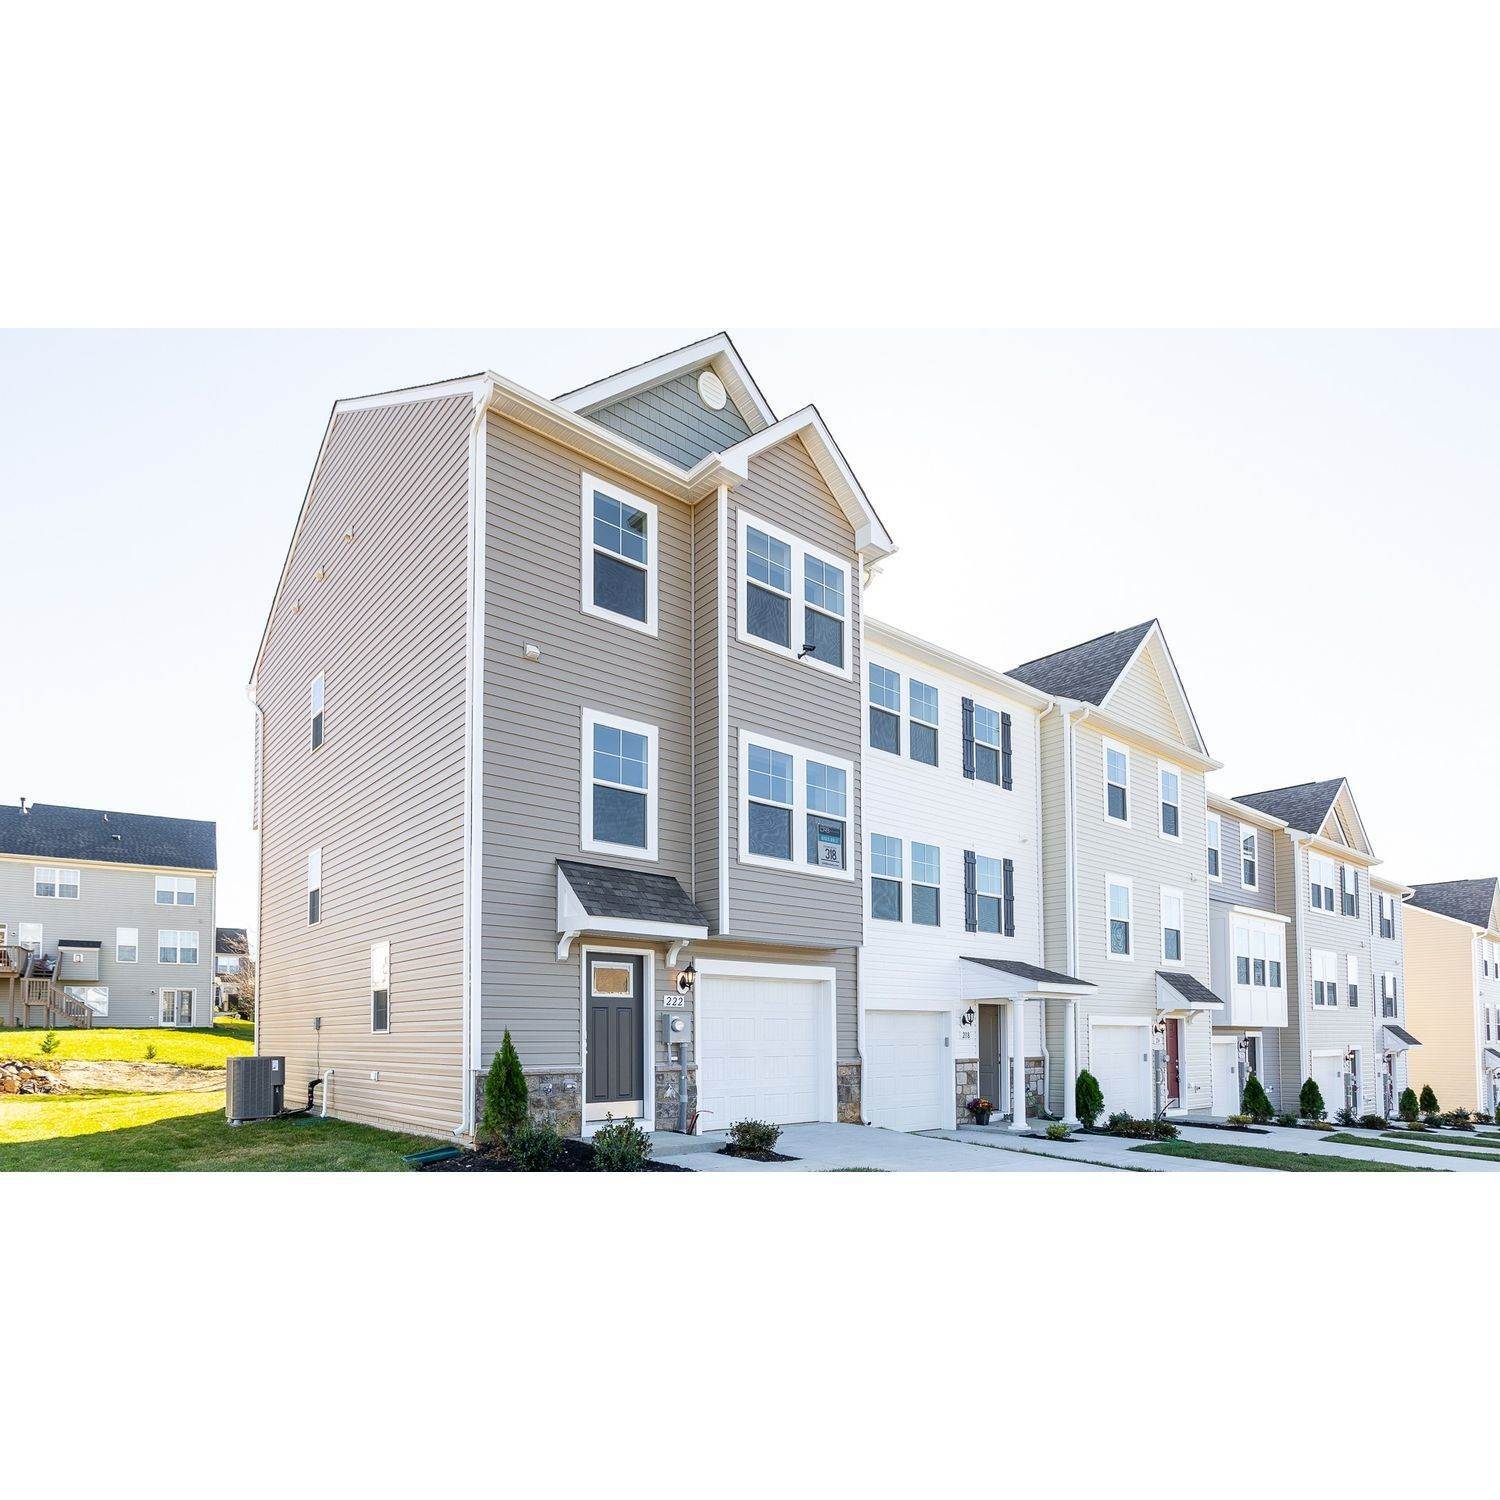 3. Archer's Rock Townhomes κτίριο σε 46 Capshaw Road, Martinsburg, WV 25403